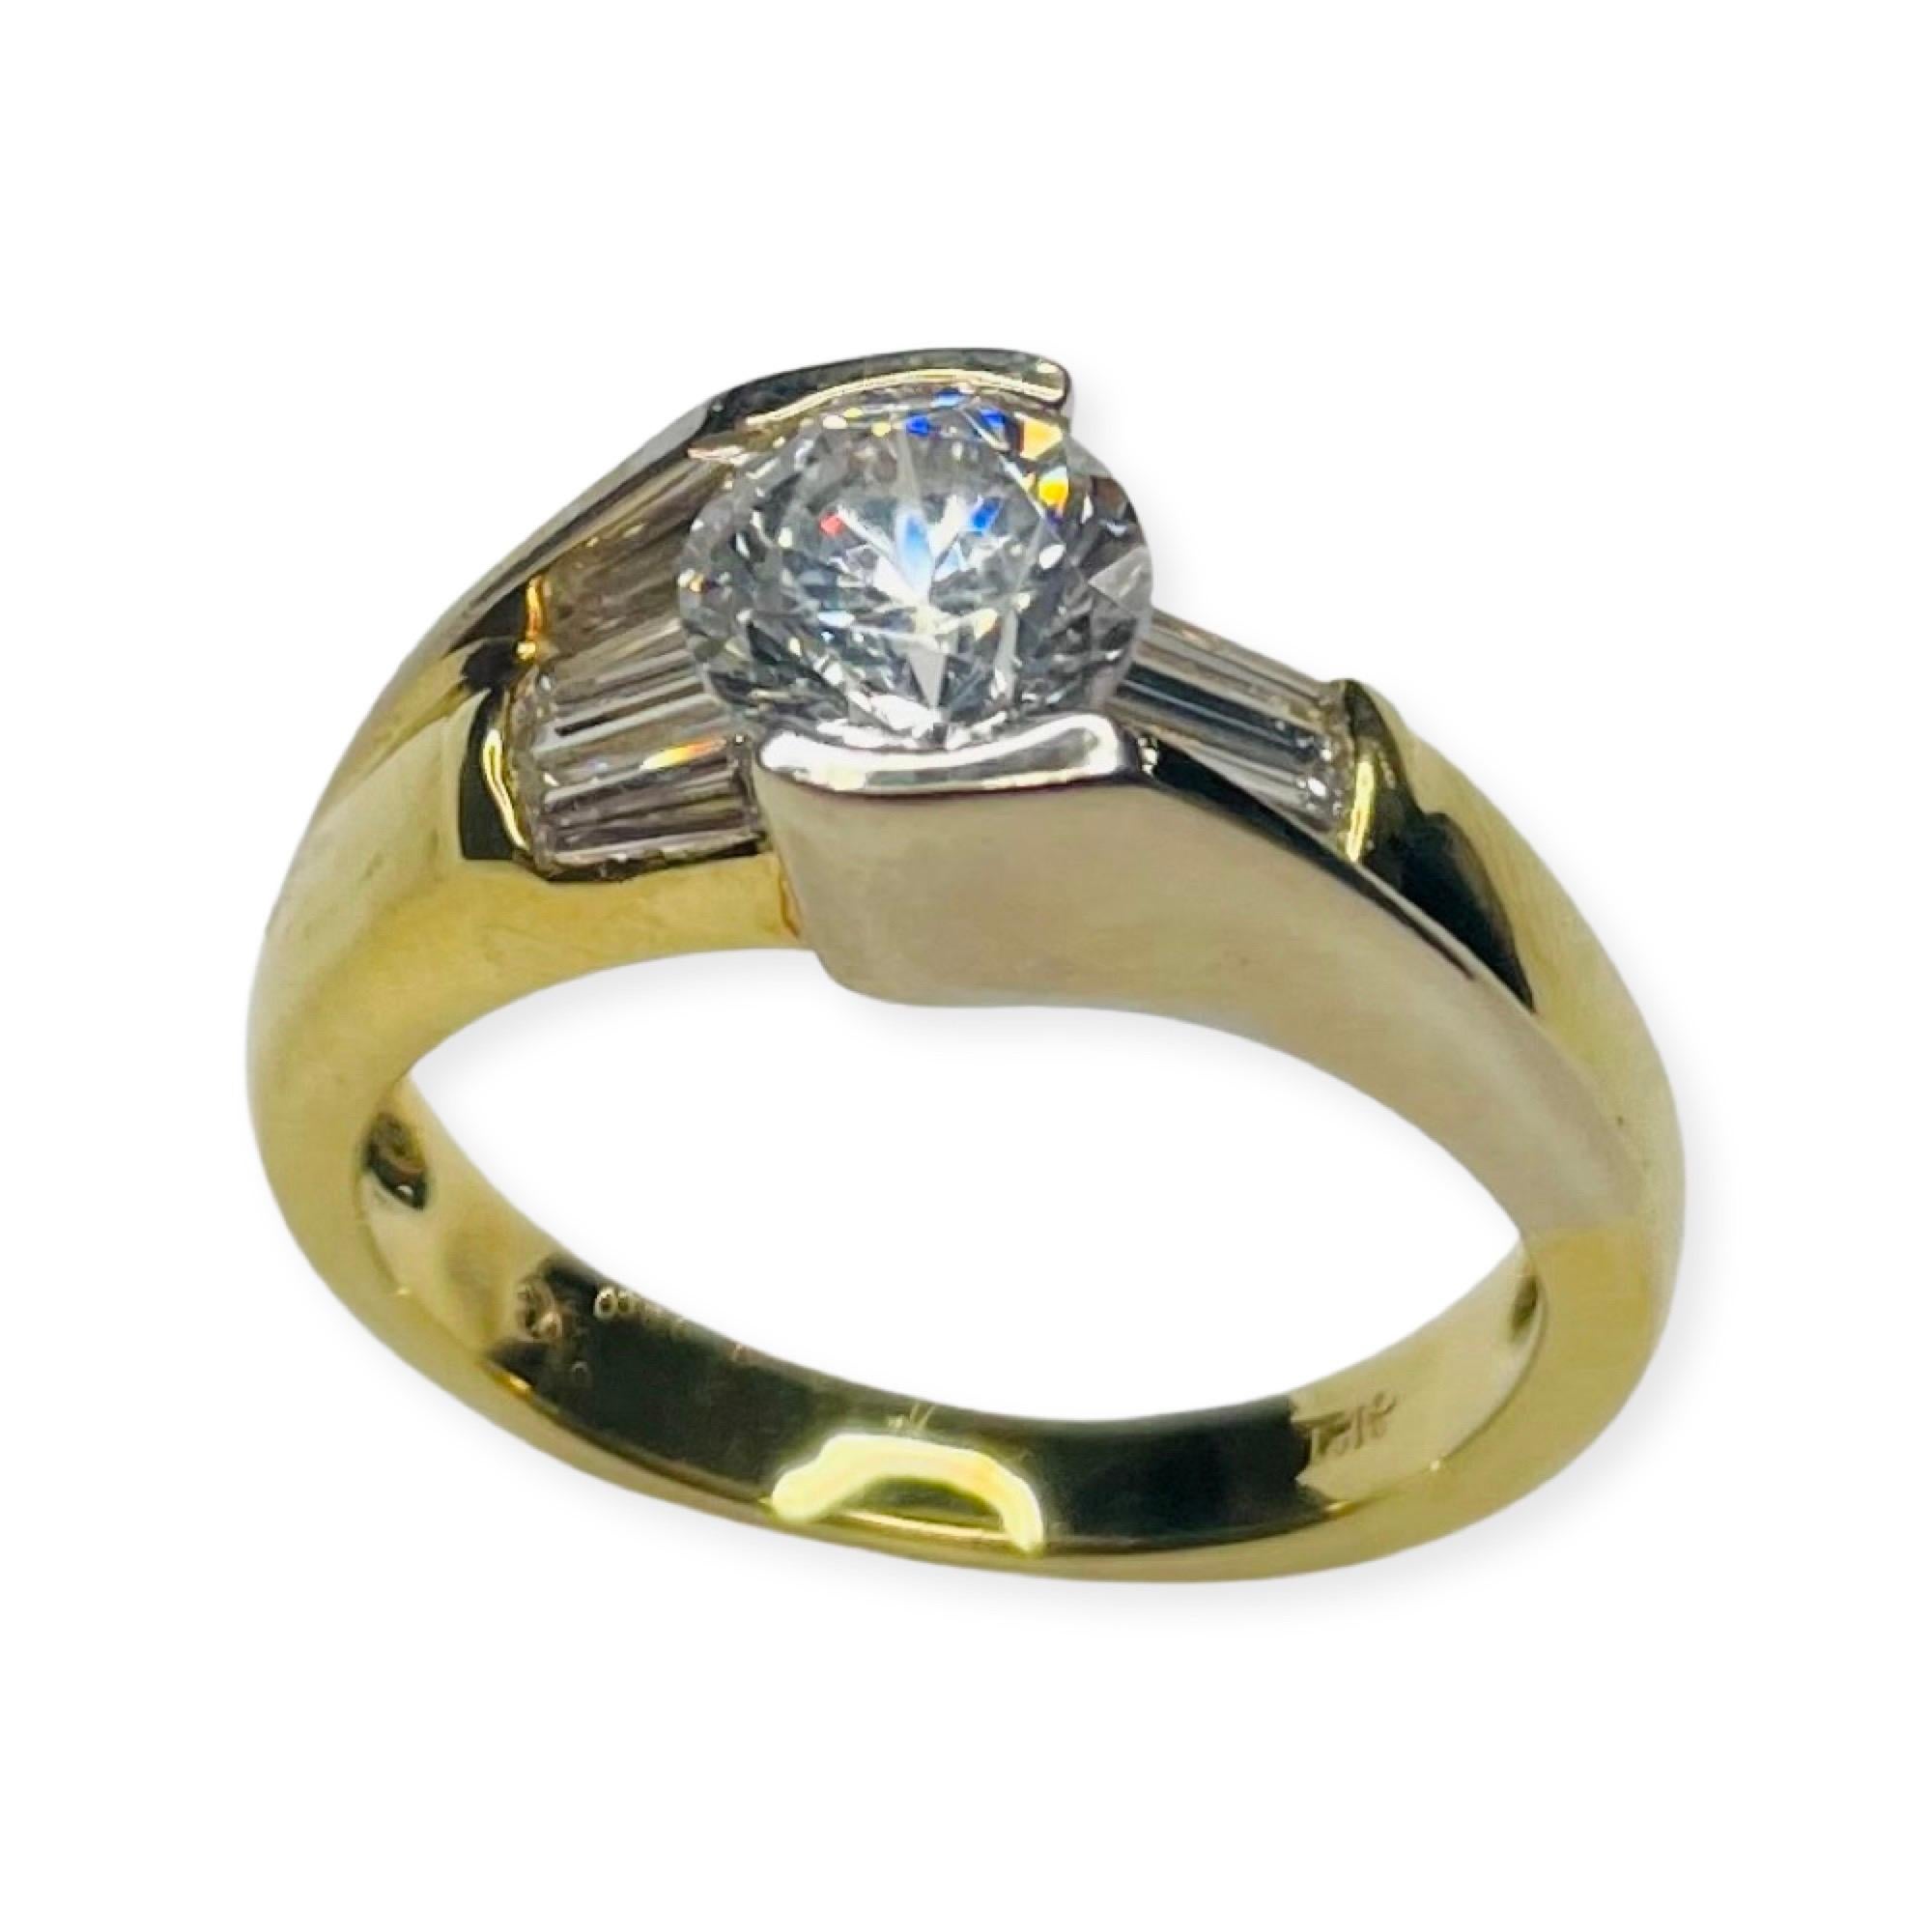 Simon G 18K Yellow and White Gold Diamond Engagement Ring. The center is a 6.5 mm Cubic Zirconia. It is equivalent to a 1.0 carat diamond. It can be replaced with a lab created or natural diamond, colored stone or moissonite for an additional fee. 